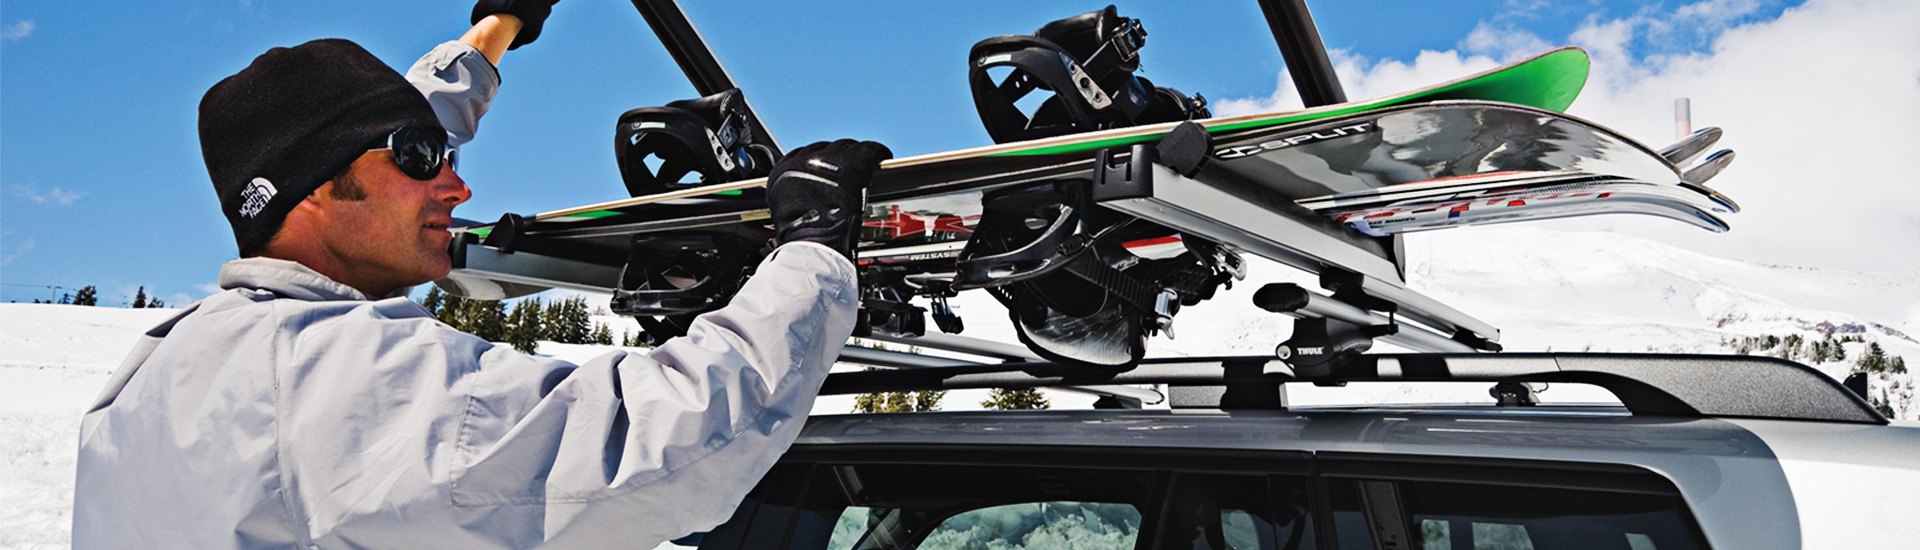 Rooftop Carriers Can Carry All Your Winter Sports Equipment